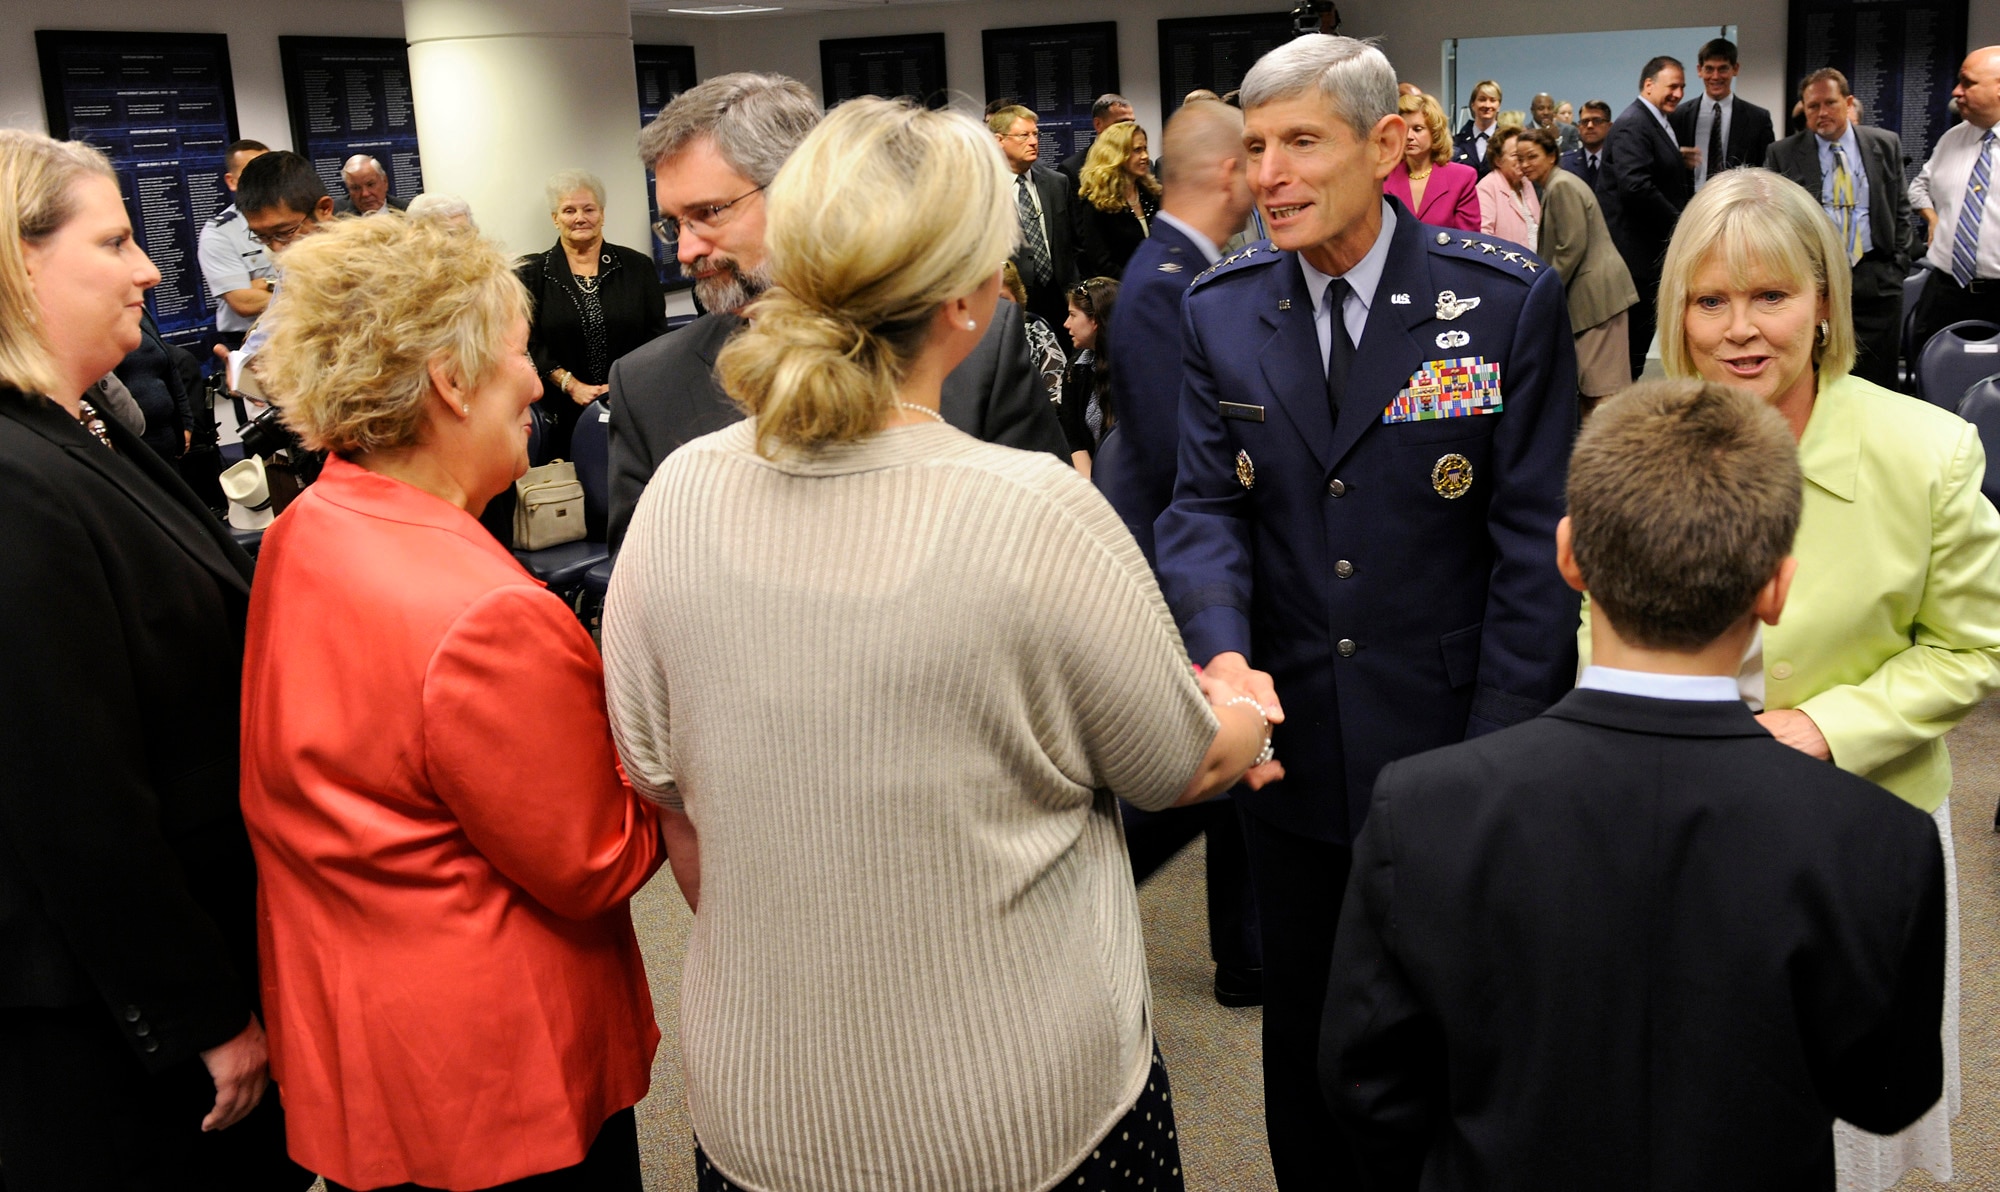 Air Force Chief of Staff Gen. Norton Schwartz and his wife Suzie congratulate family members of Capt. Francis Gary Powers following his posthumous presentation of the Silver Star on June 15, 2012, in the Pentagon. Powers was shot down over the Soviet Union on May 1, 1960, and received the decoration for the heroism he displayed while held prisoner by the Soviets. He was released in 1962 but subsequently died in a 1977 helicopter crash. (U.S. Air Force photo/Scott M. Ash)